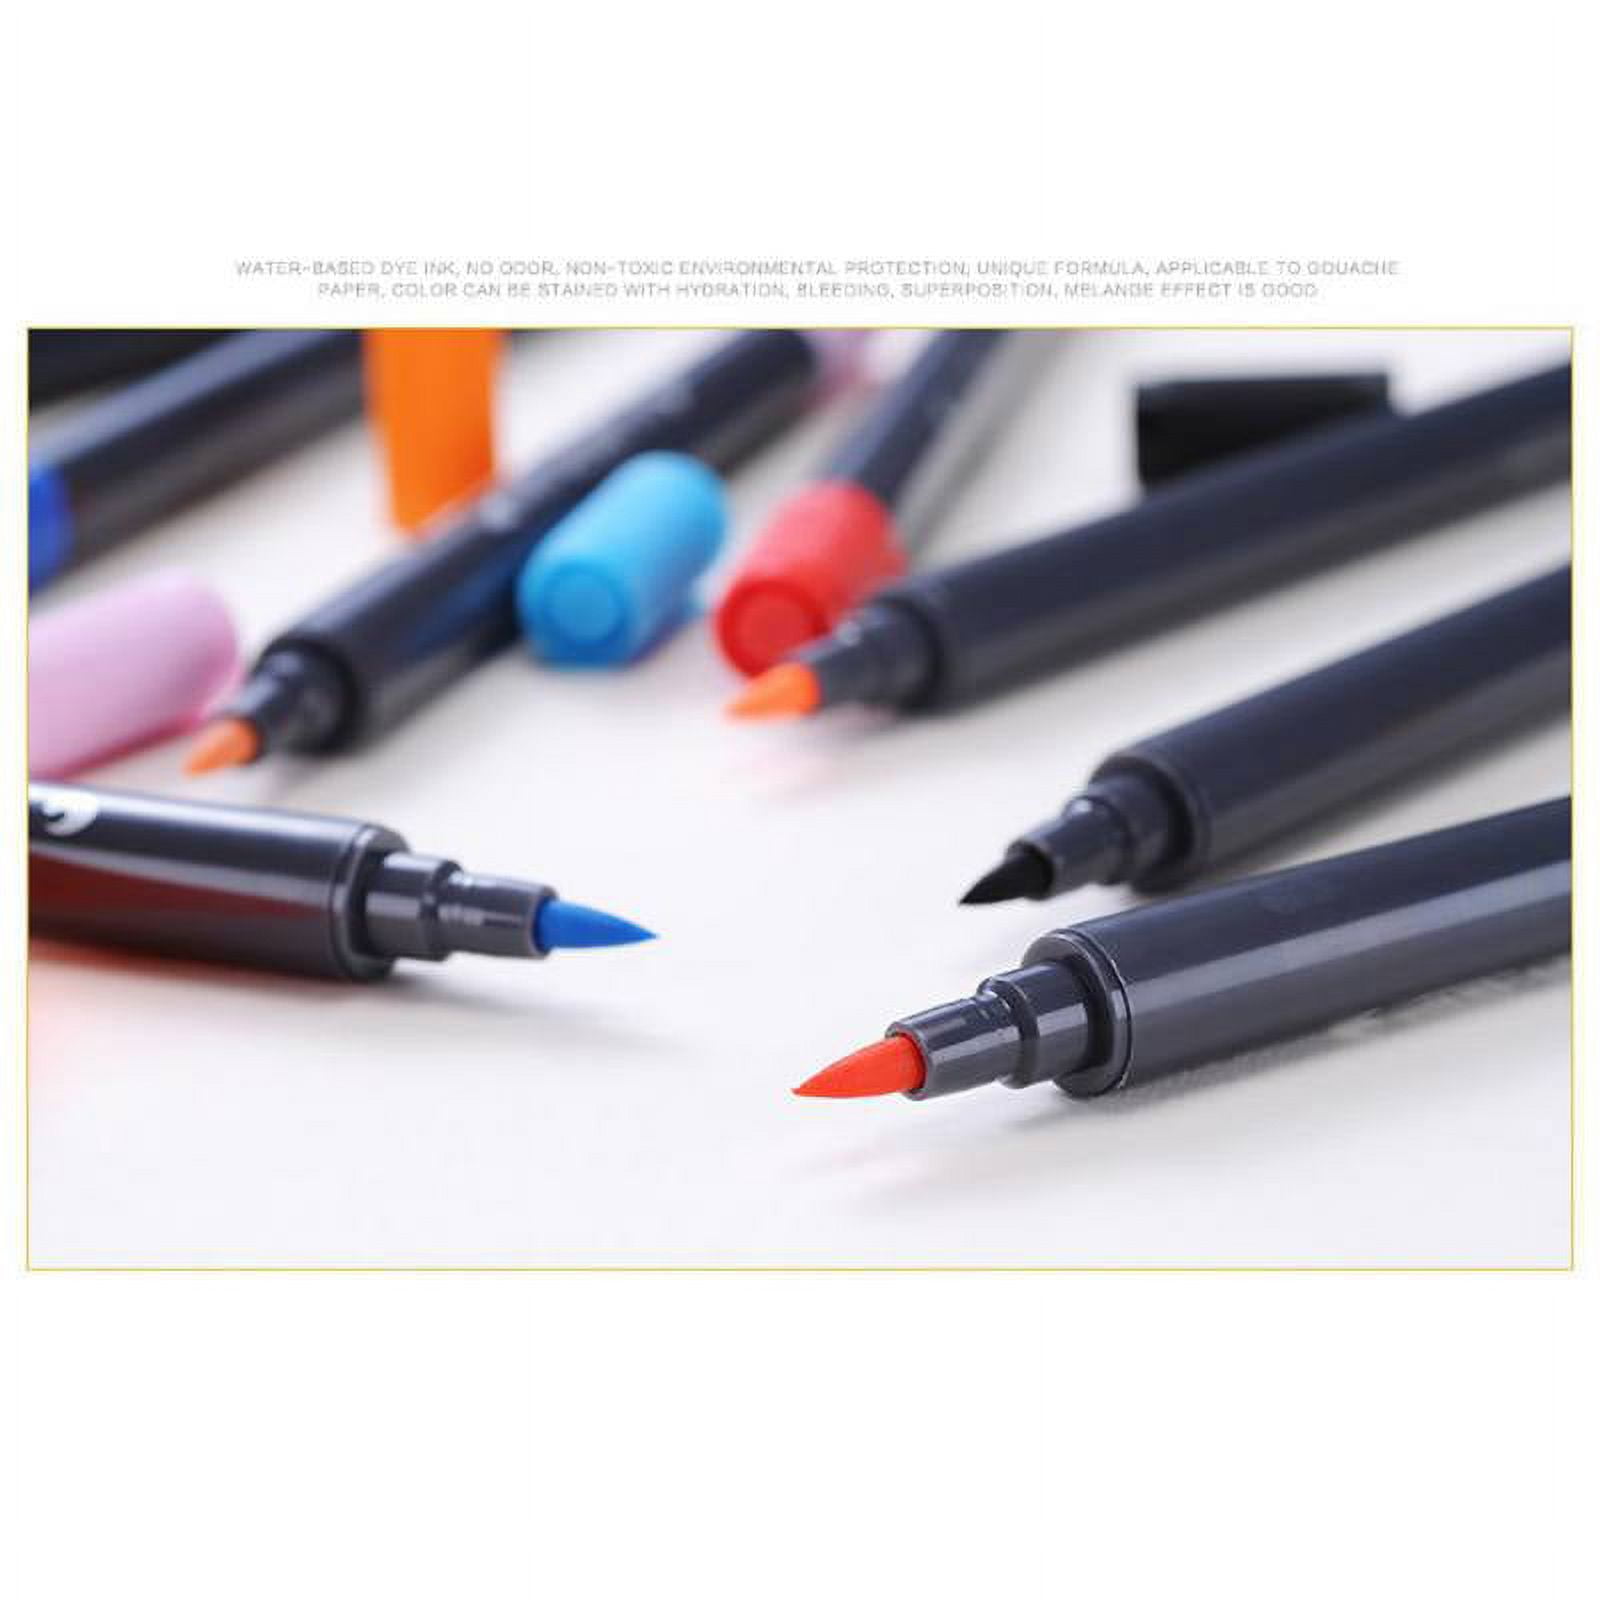 The Best Brush Pens for Calligraphy and Ink Painting –